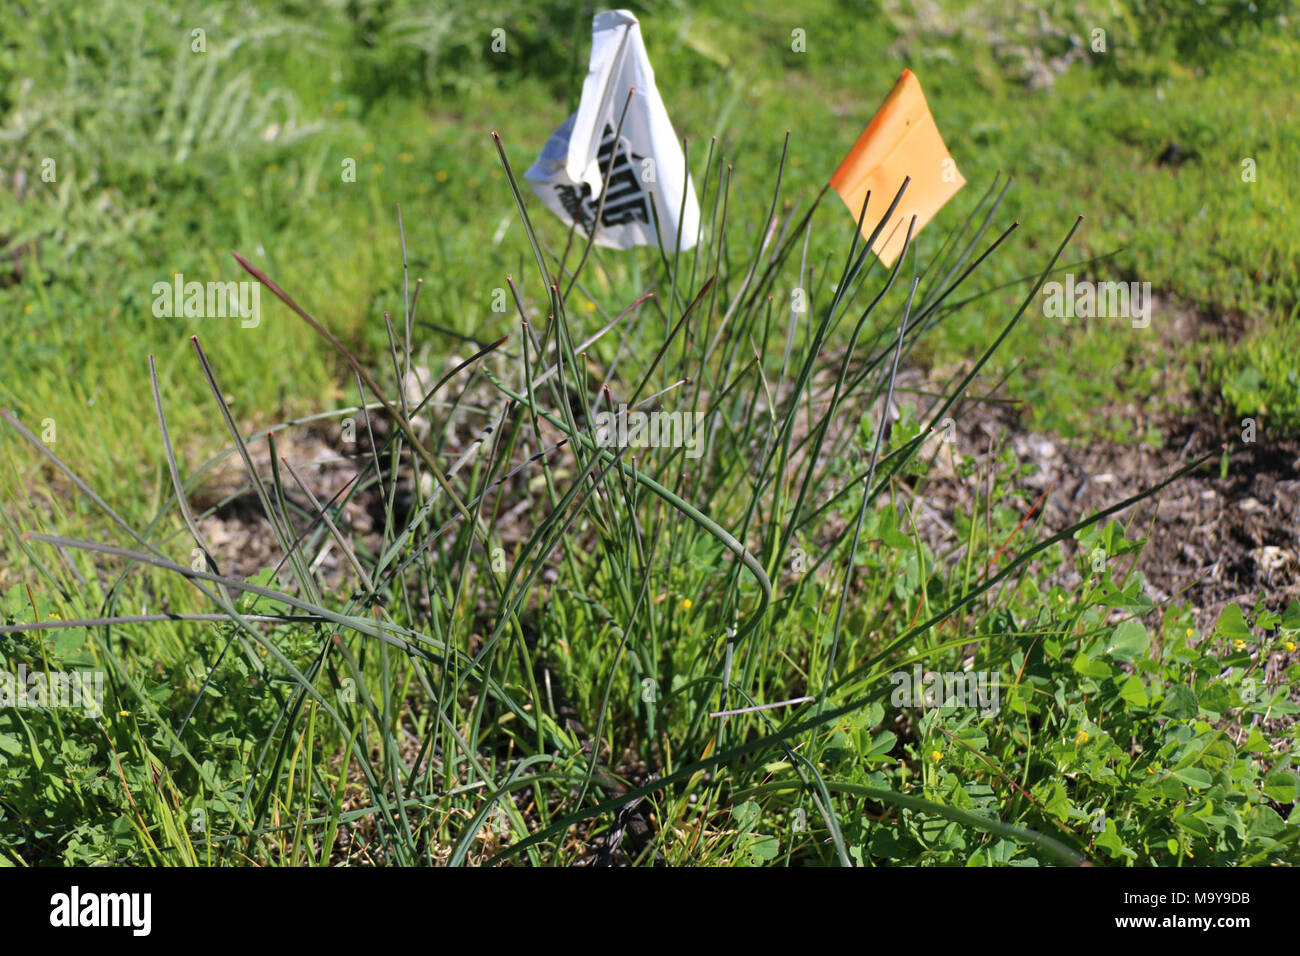 Flags mark the location of thread-leaved brodiaea. Flags mark the location of thread-leaved brodiaea on the brodiaea preserve, and those that will be translocated to the preserve from the area being developed. Stock Photo